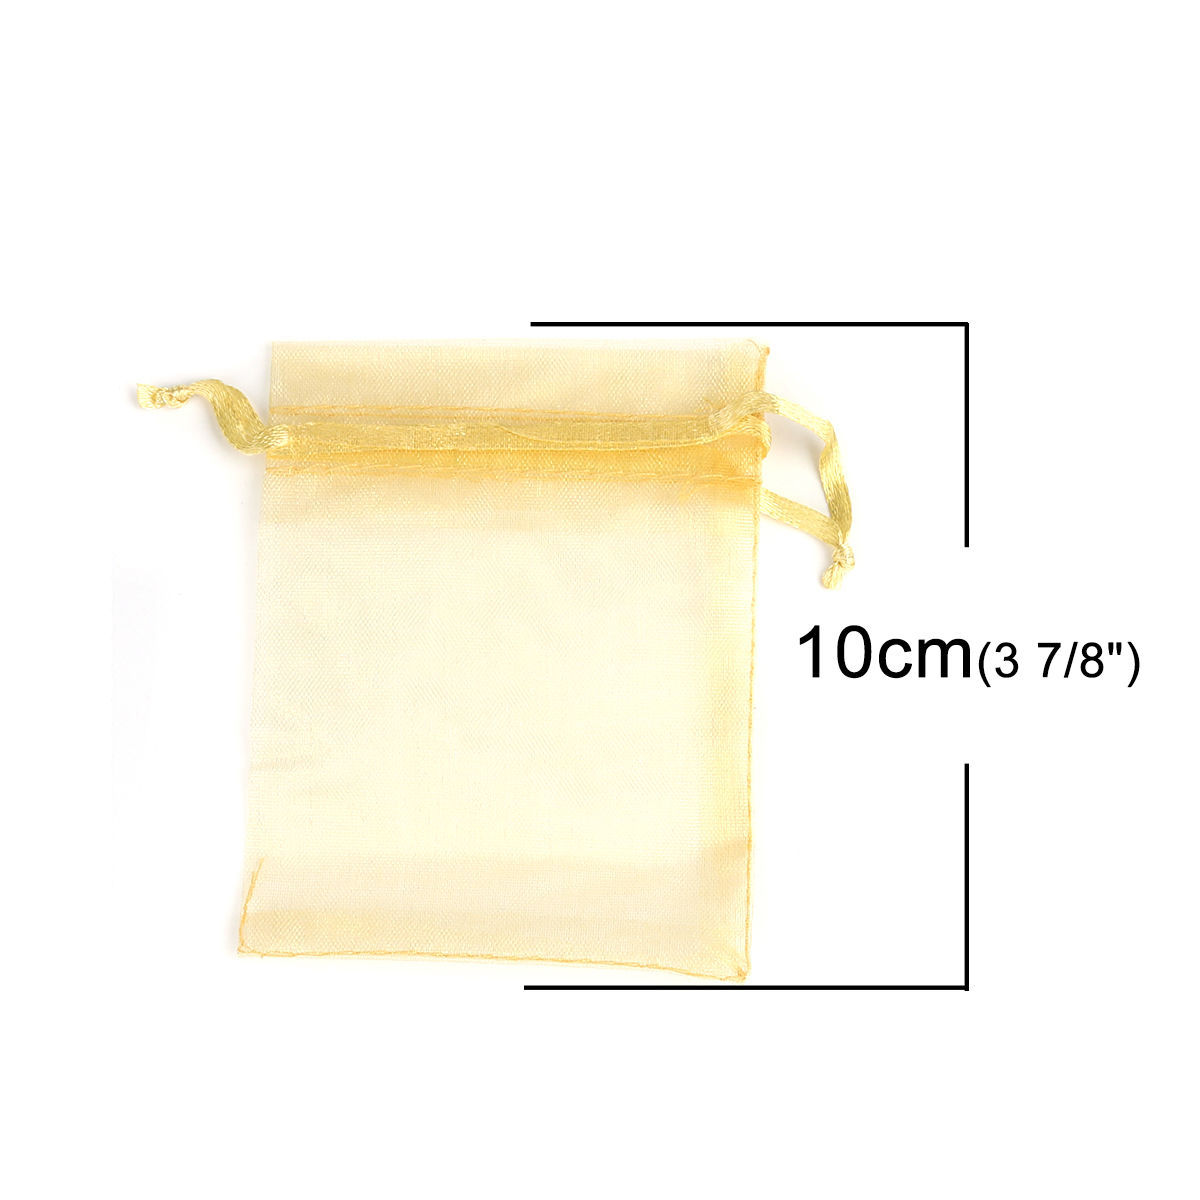 Picture of Wedding Gift Organza Jewelry Bags Drawstring Rectangle Golden 10cm x8cm(3 7/8" x3 1/8"), (Usable Space: 8x8cm) 30 PCs